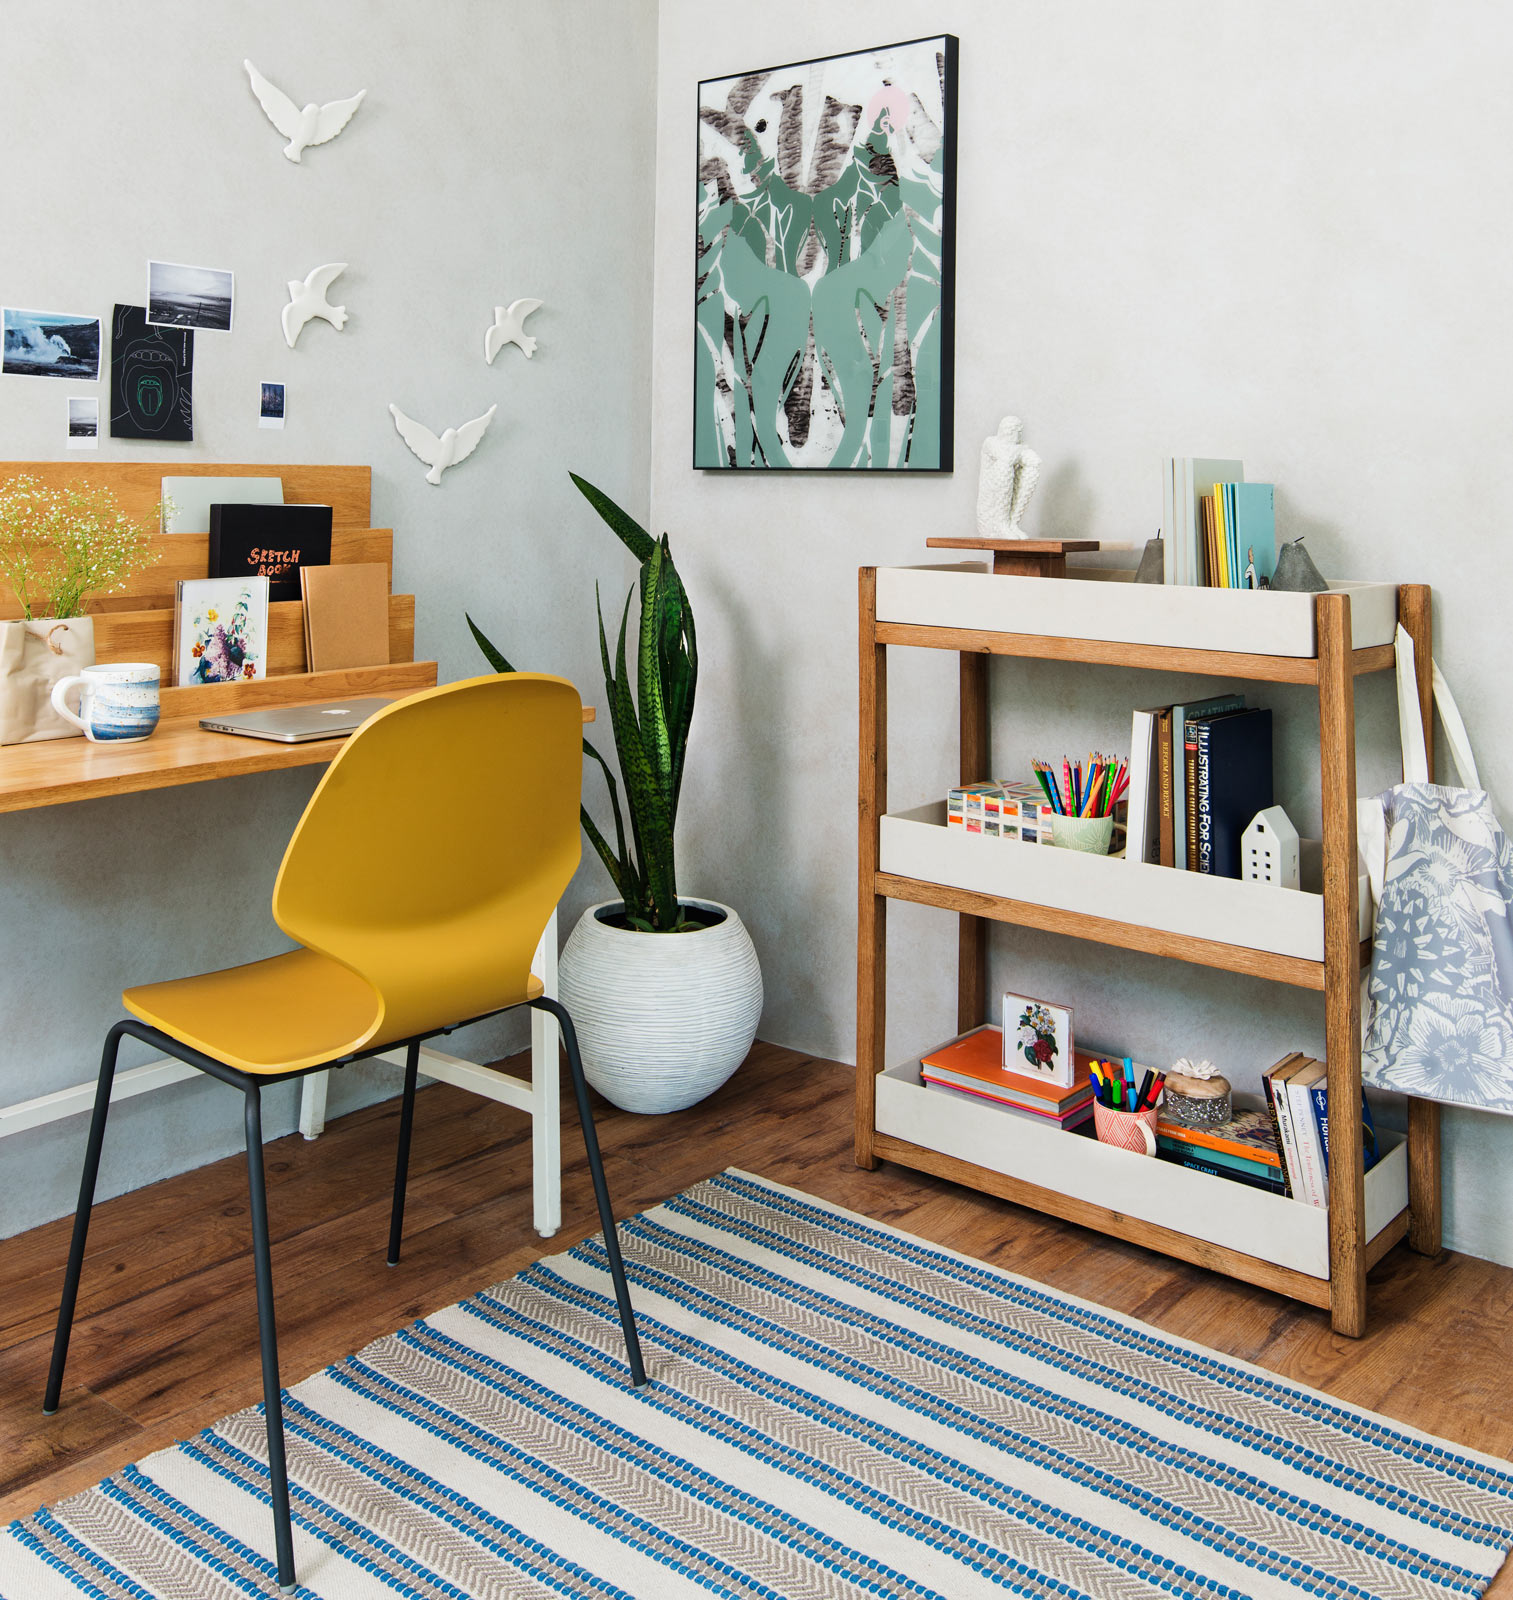 Here’s how you can create your dream home office interiors - Beautiful Homes